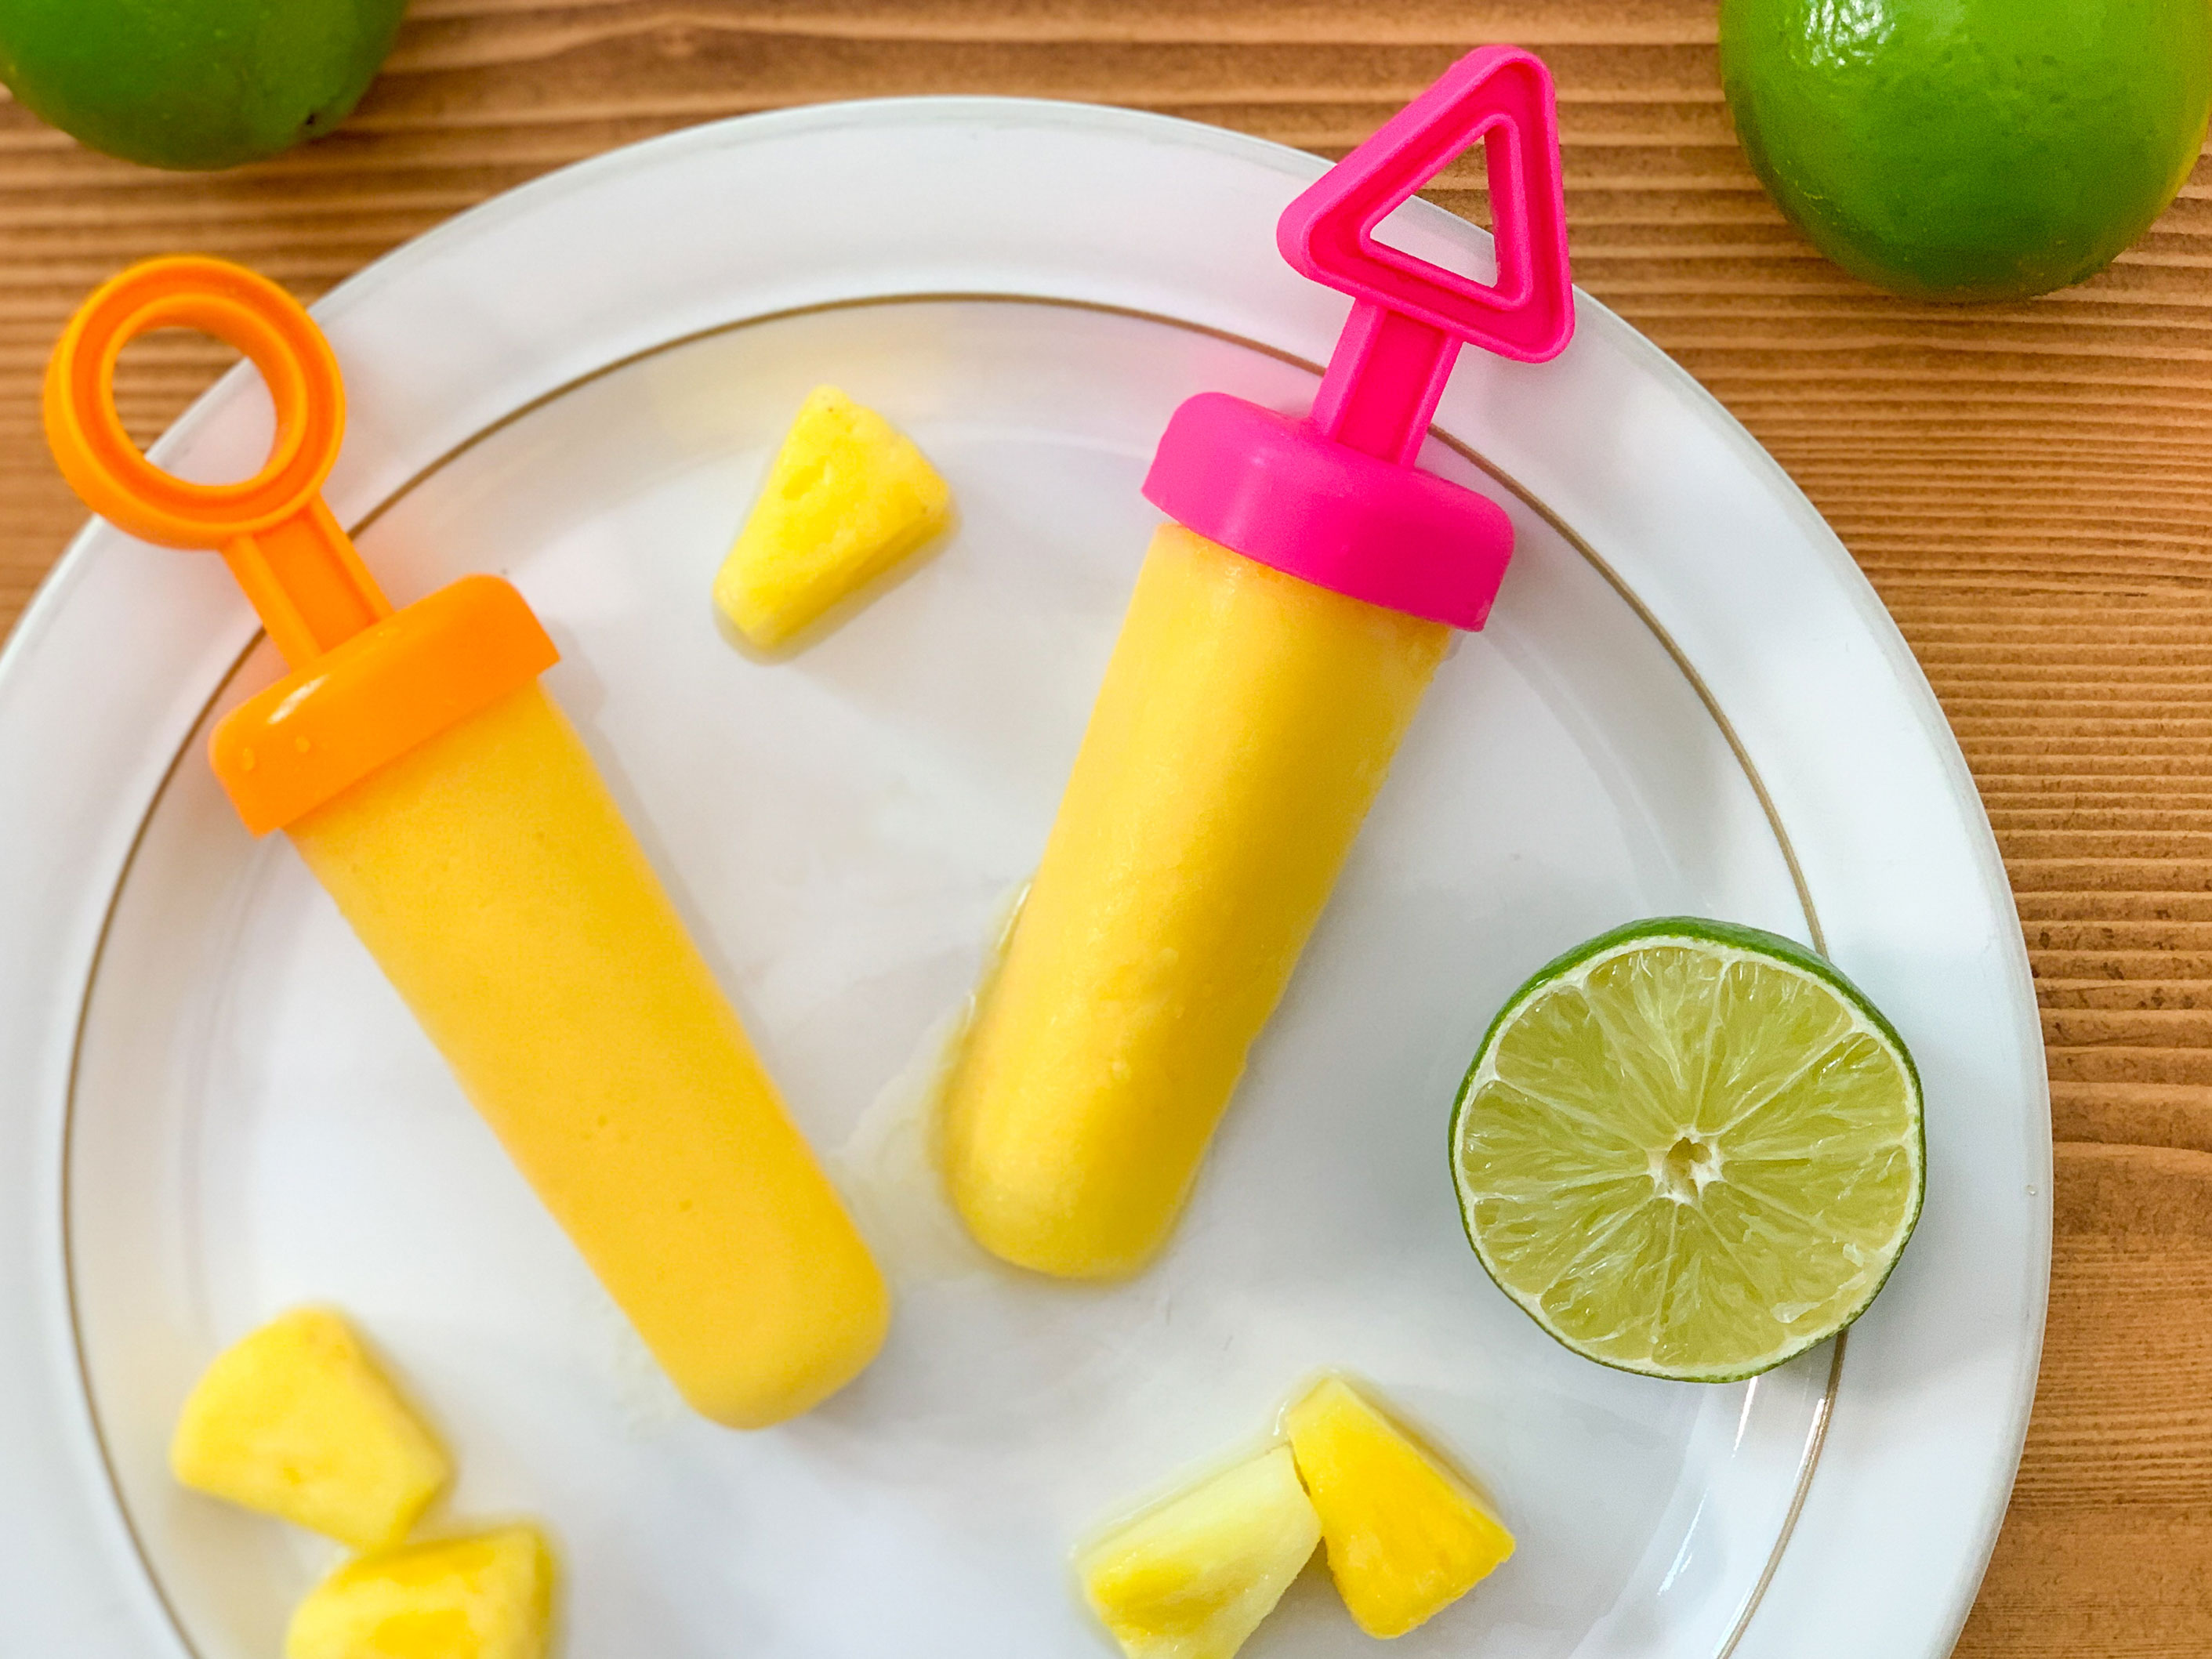 two frozen popsicles on a plate next to limes and pineapple pieces